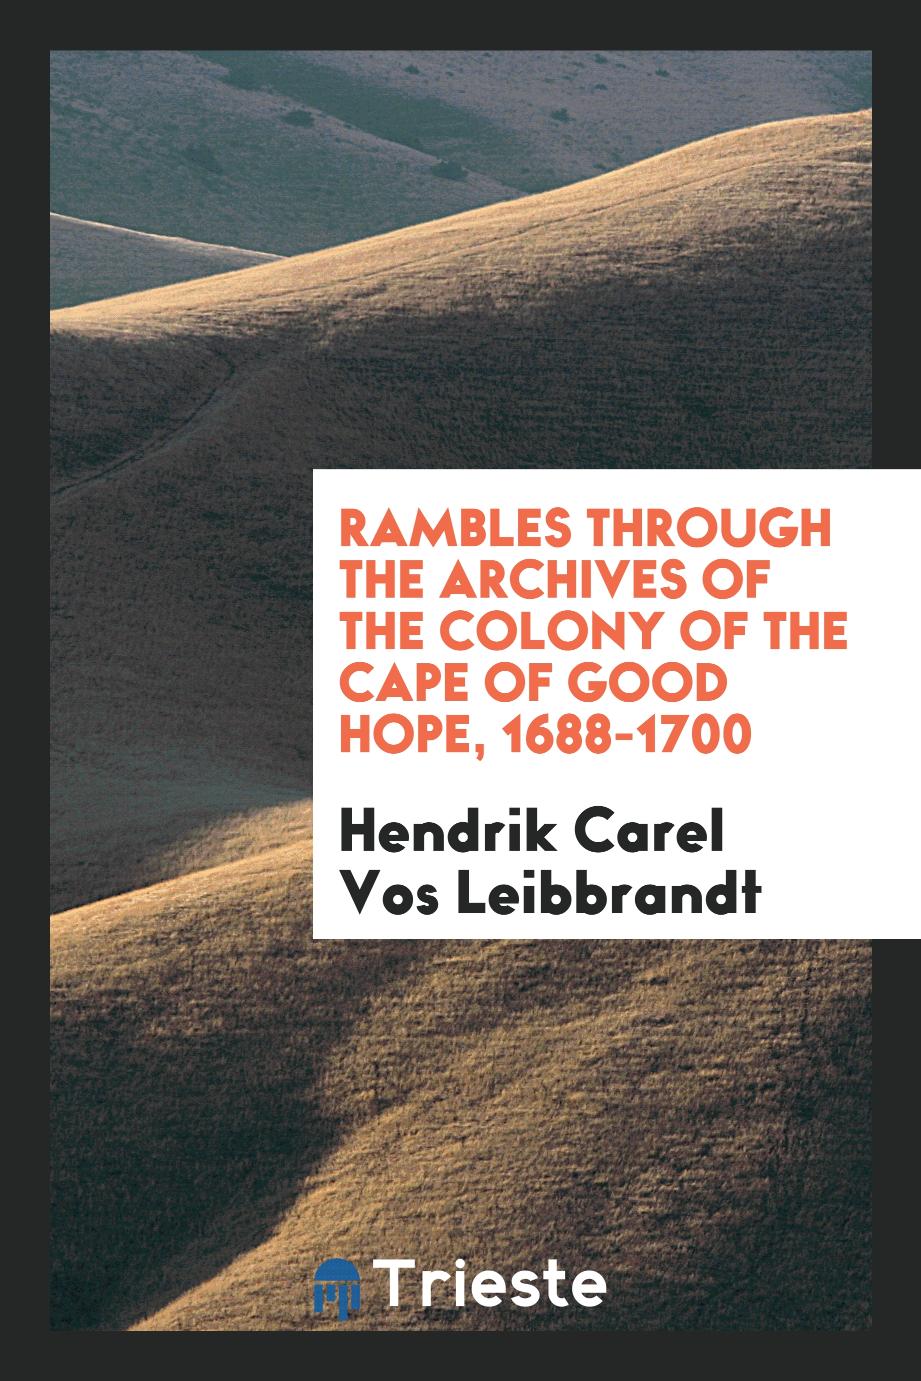 Rambles through the archives of the colony of the Cape of Good Hope, 1688-1700